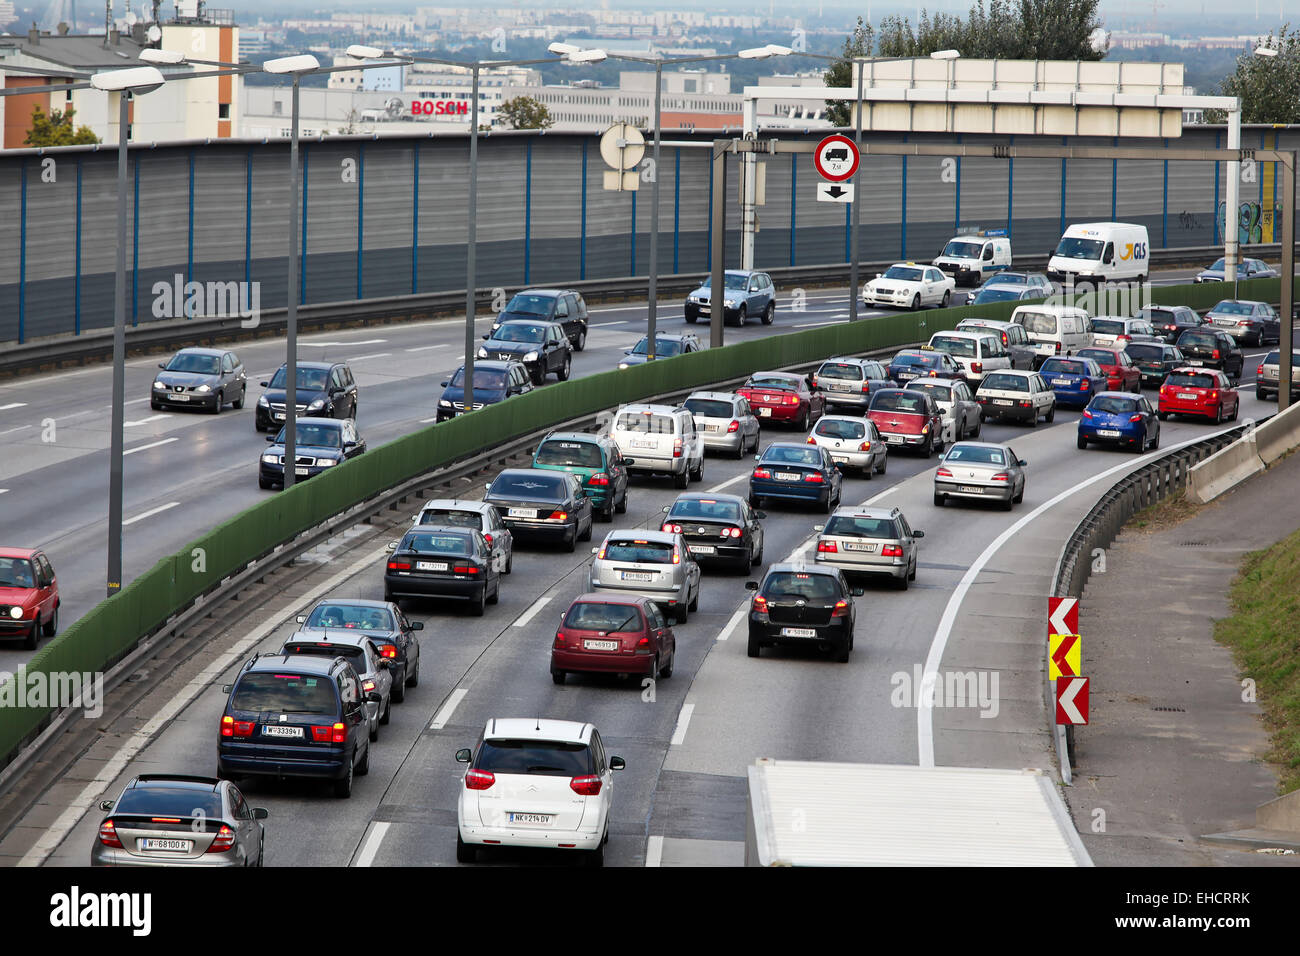 Traffic jam with cars on a highway Stock Photo